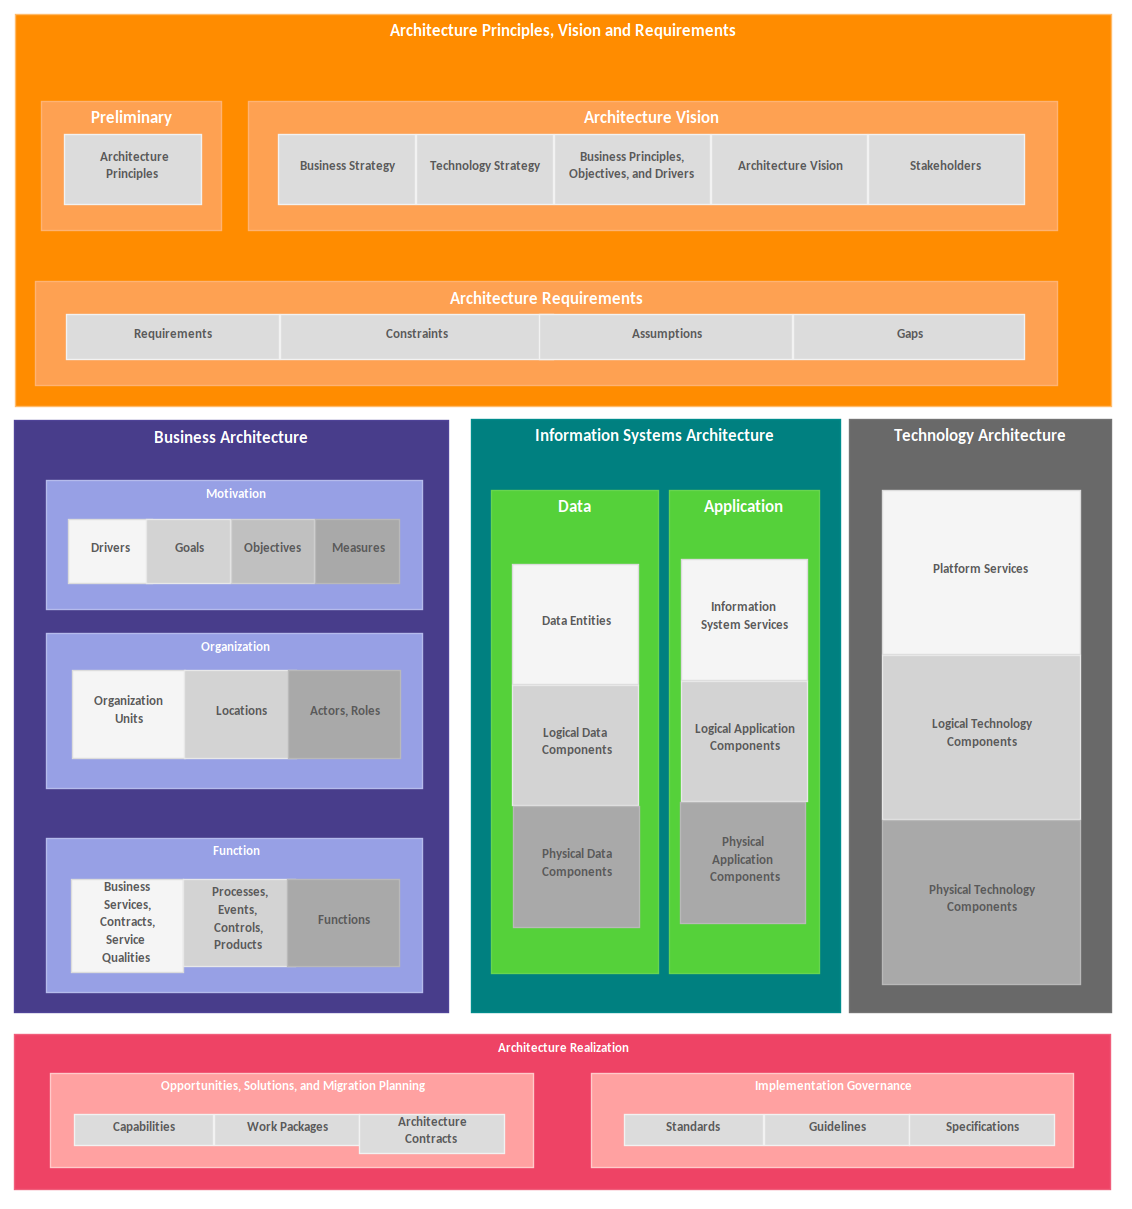 Custom Diagrams Example - Operating Model Business Architecture<br />